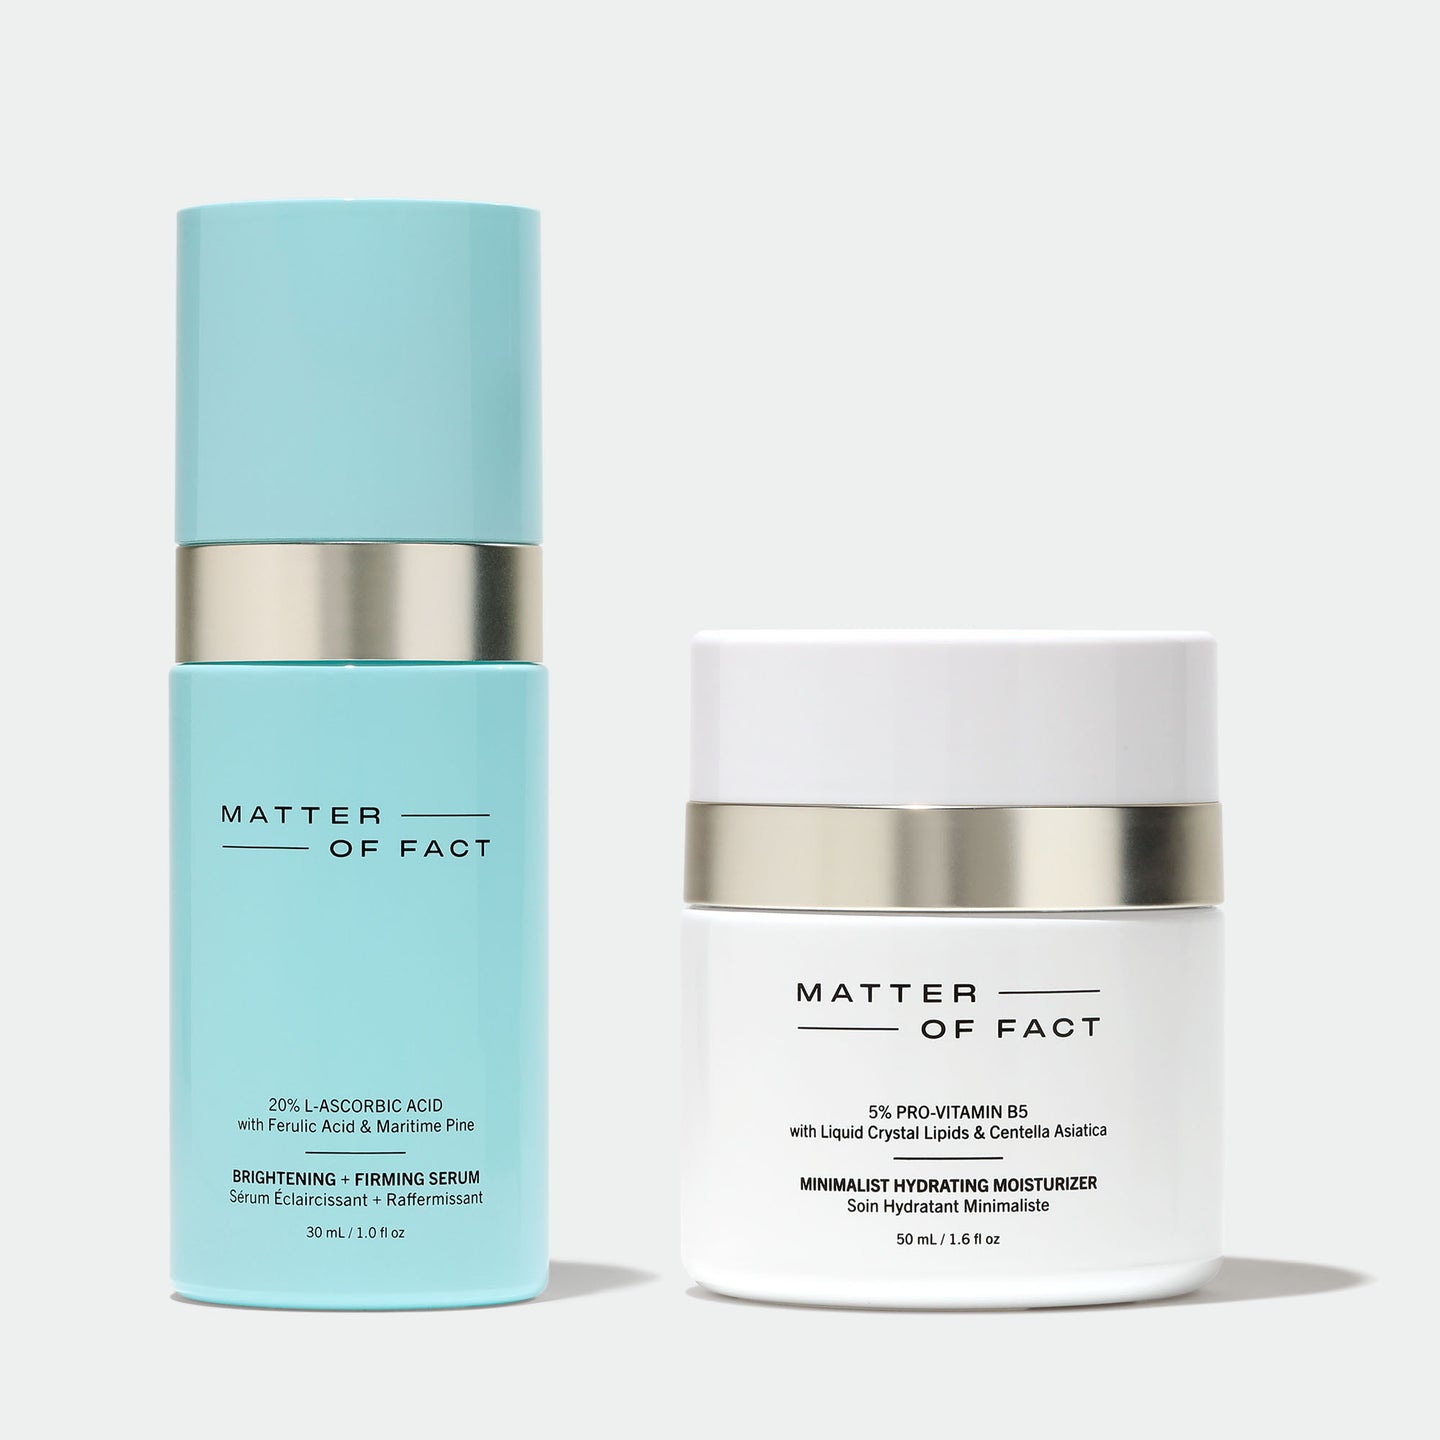 MATTER OF FACT SKINCARE BRIGHTENING AND FIRMING SERUM AND MINIMALIST HYDRATING MOISTURIZER 